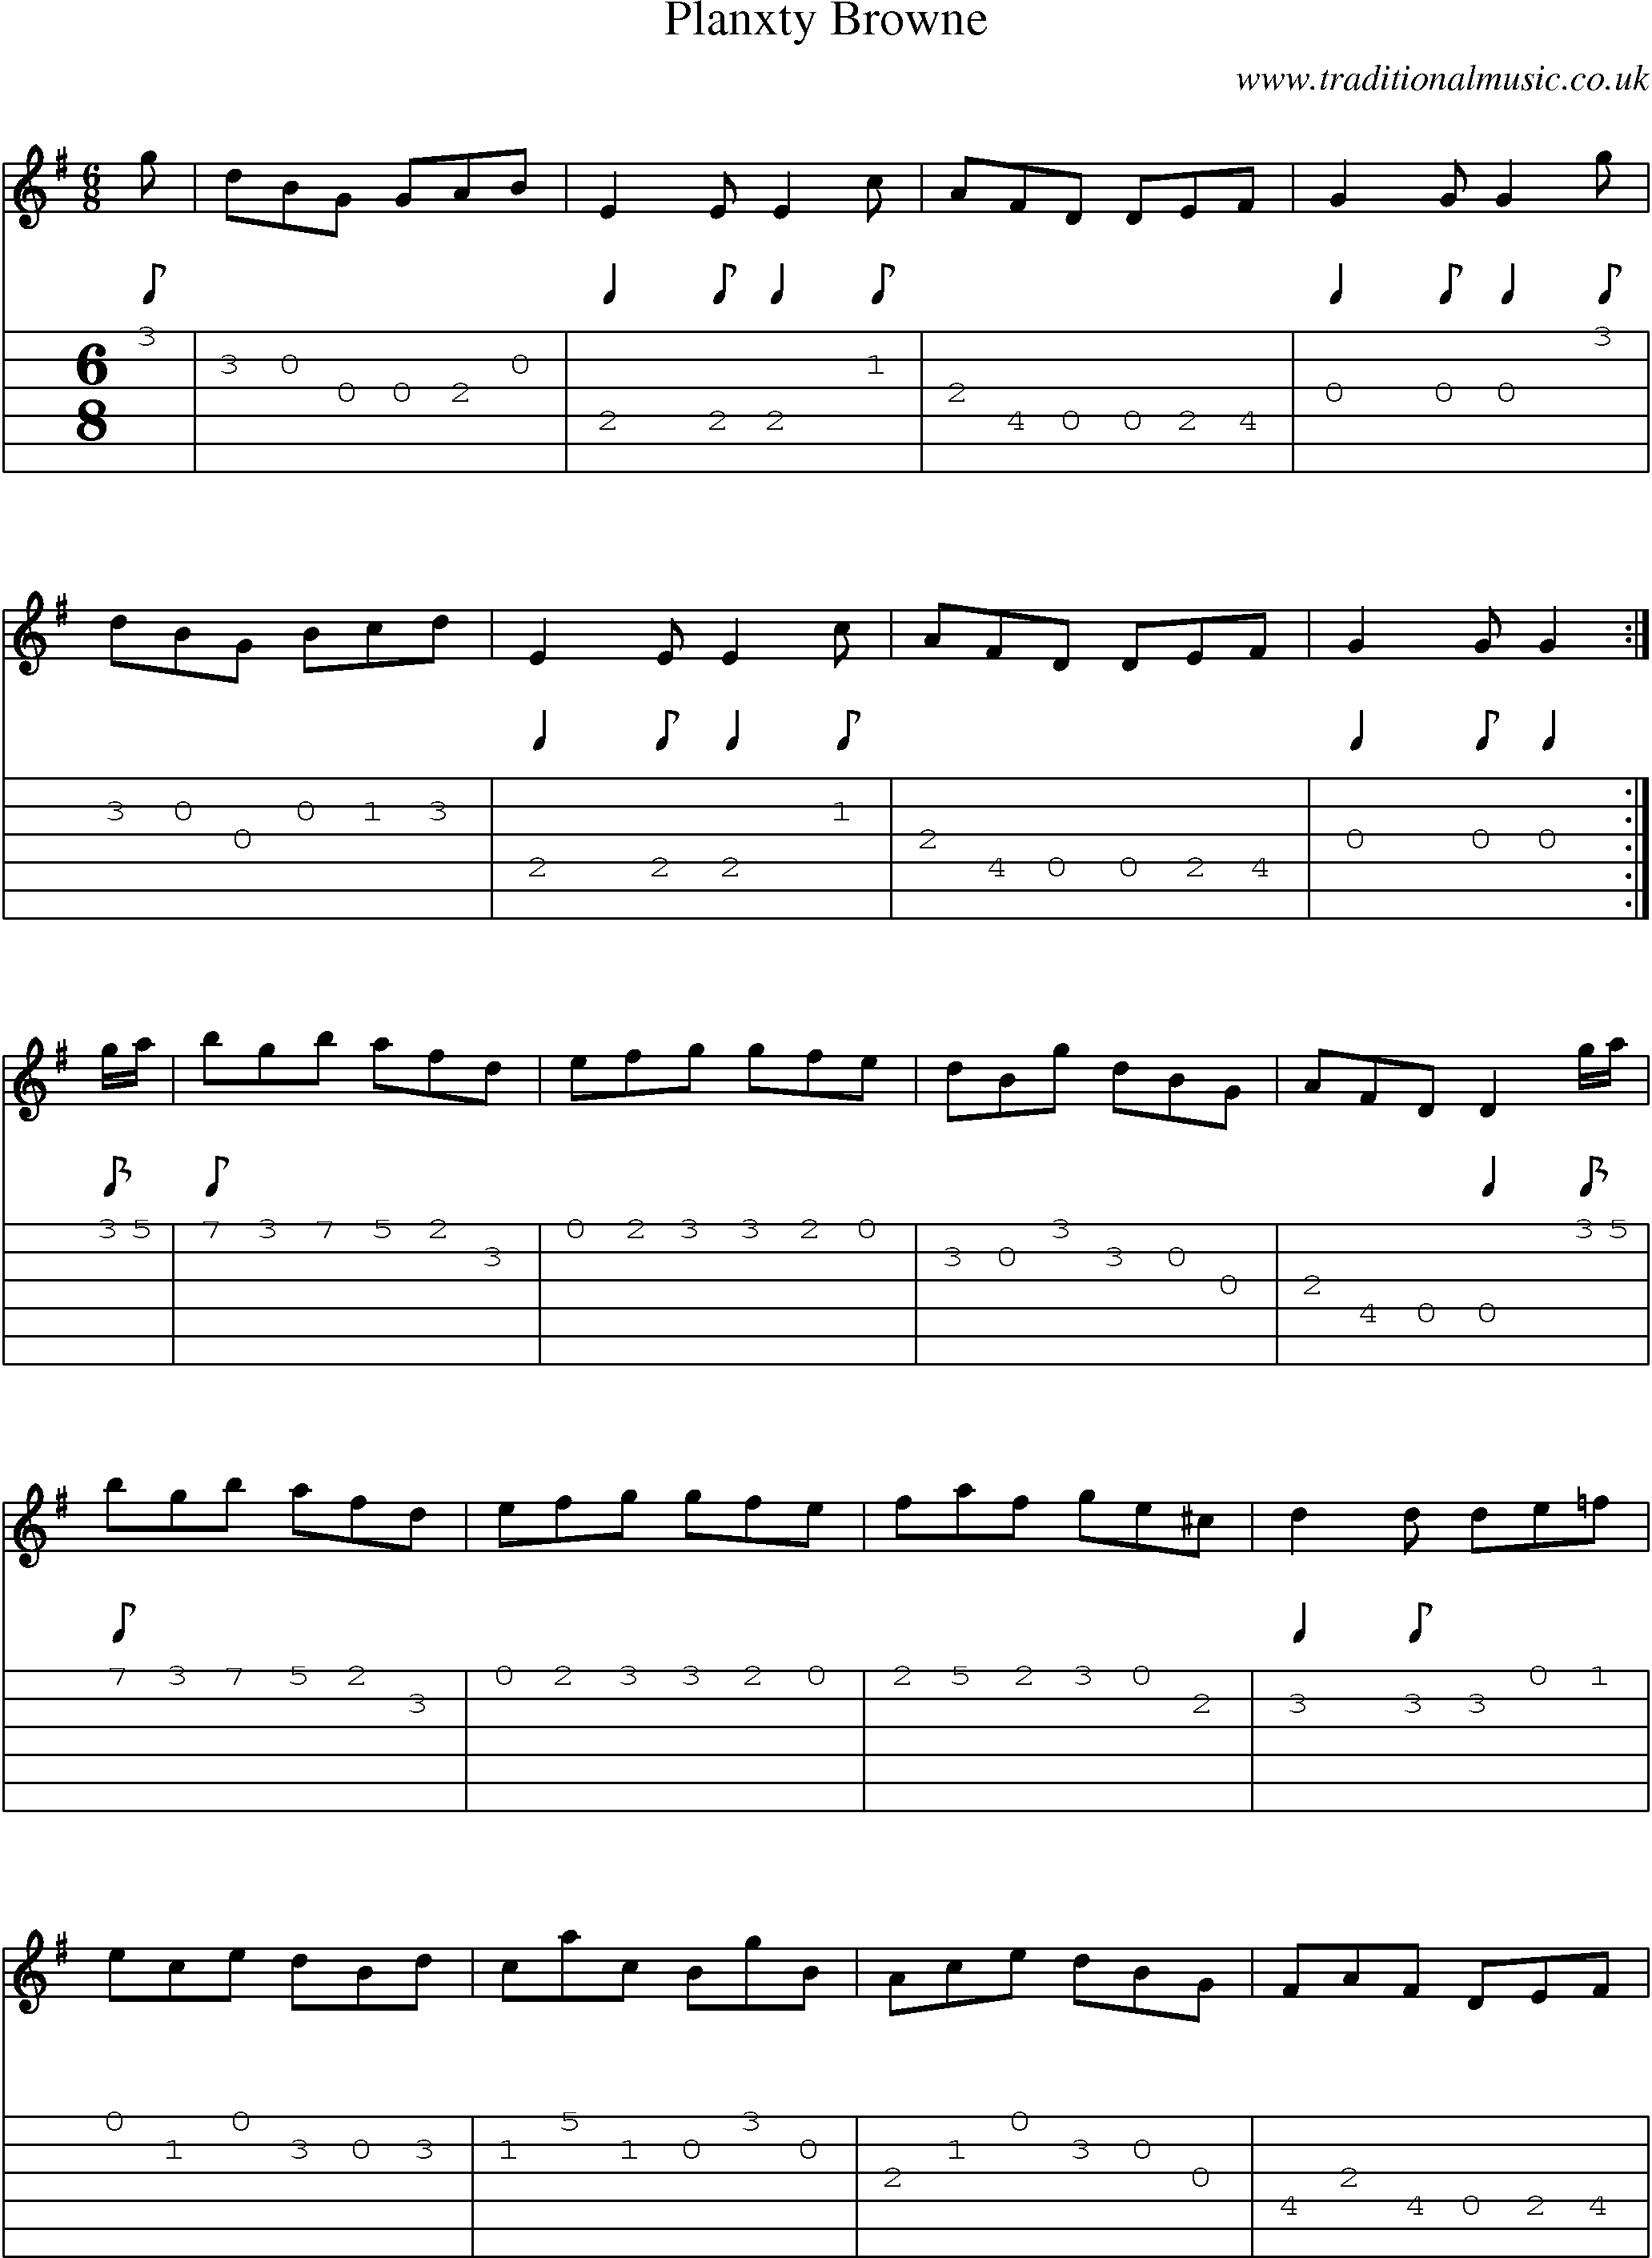 Music Score and Guitar Tabs for Planxty Browne